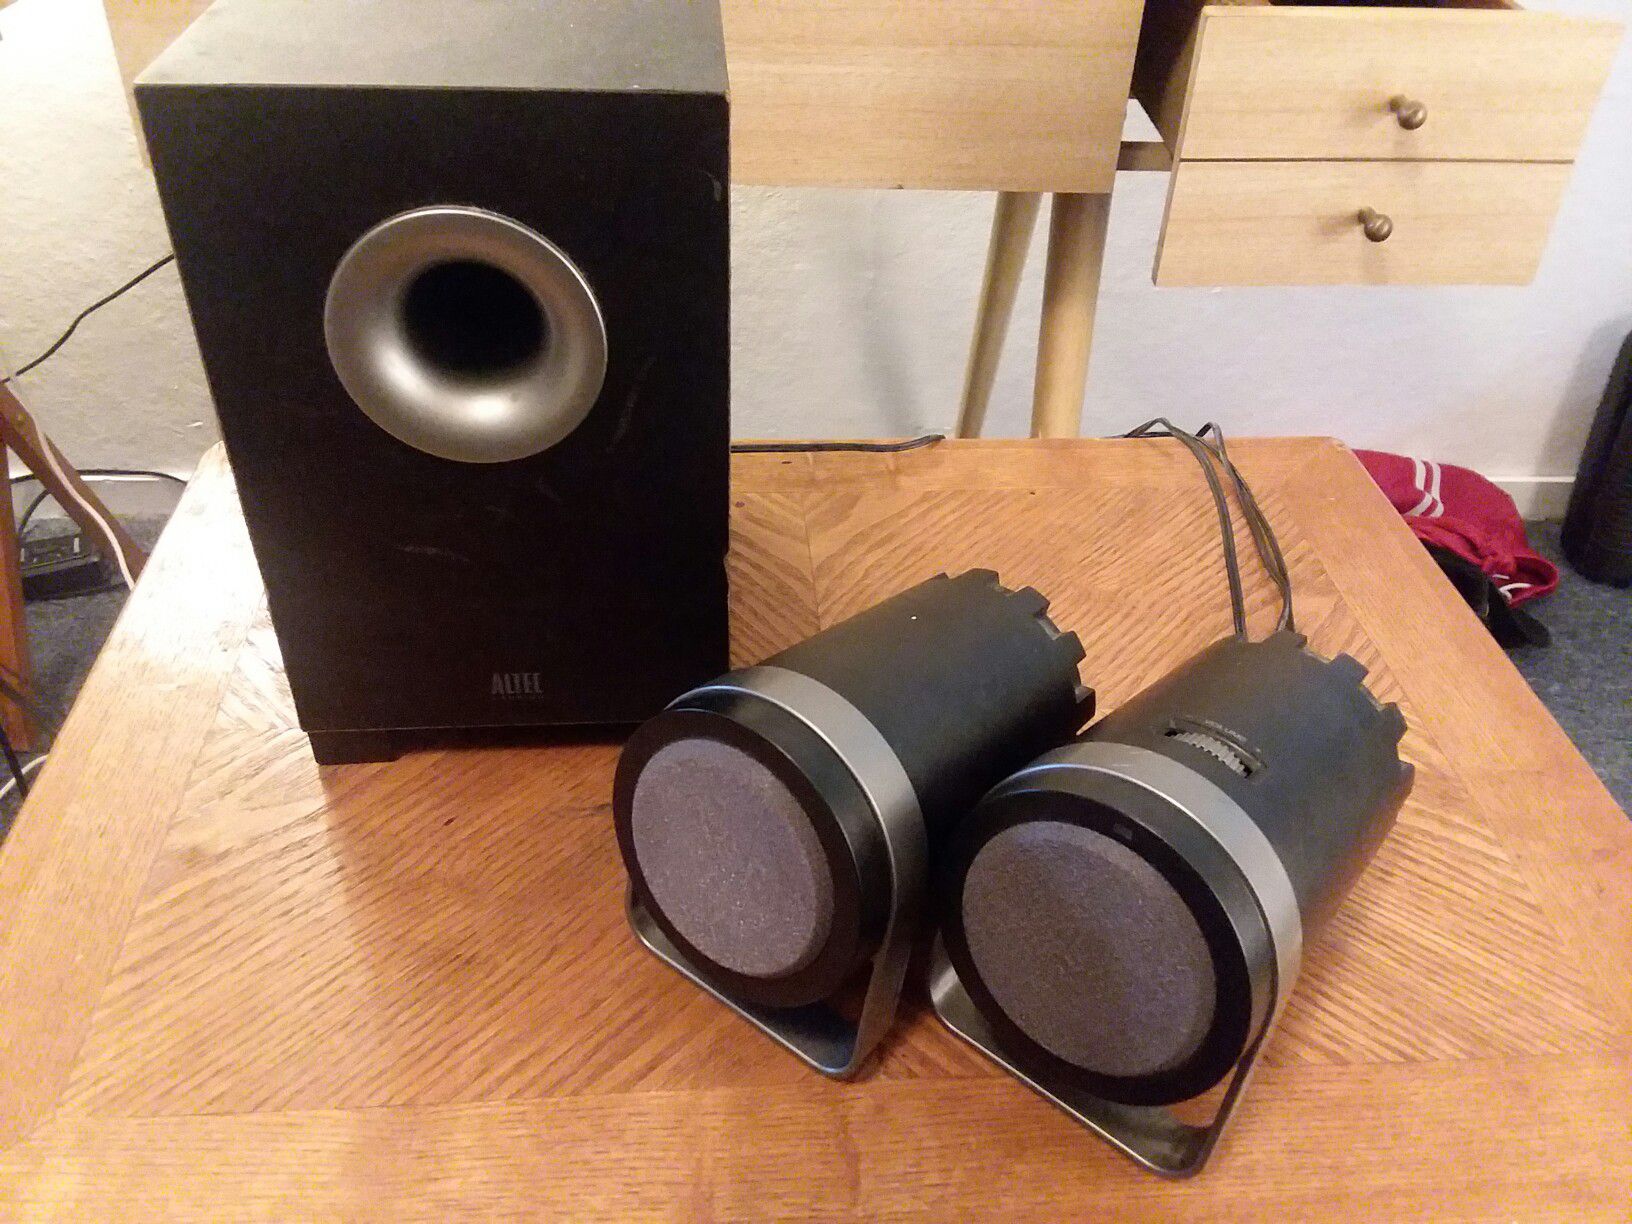 Altec Lansing speakers with subwoofer